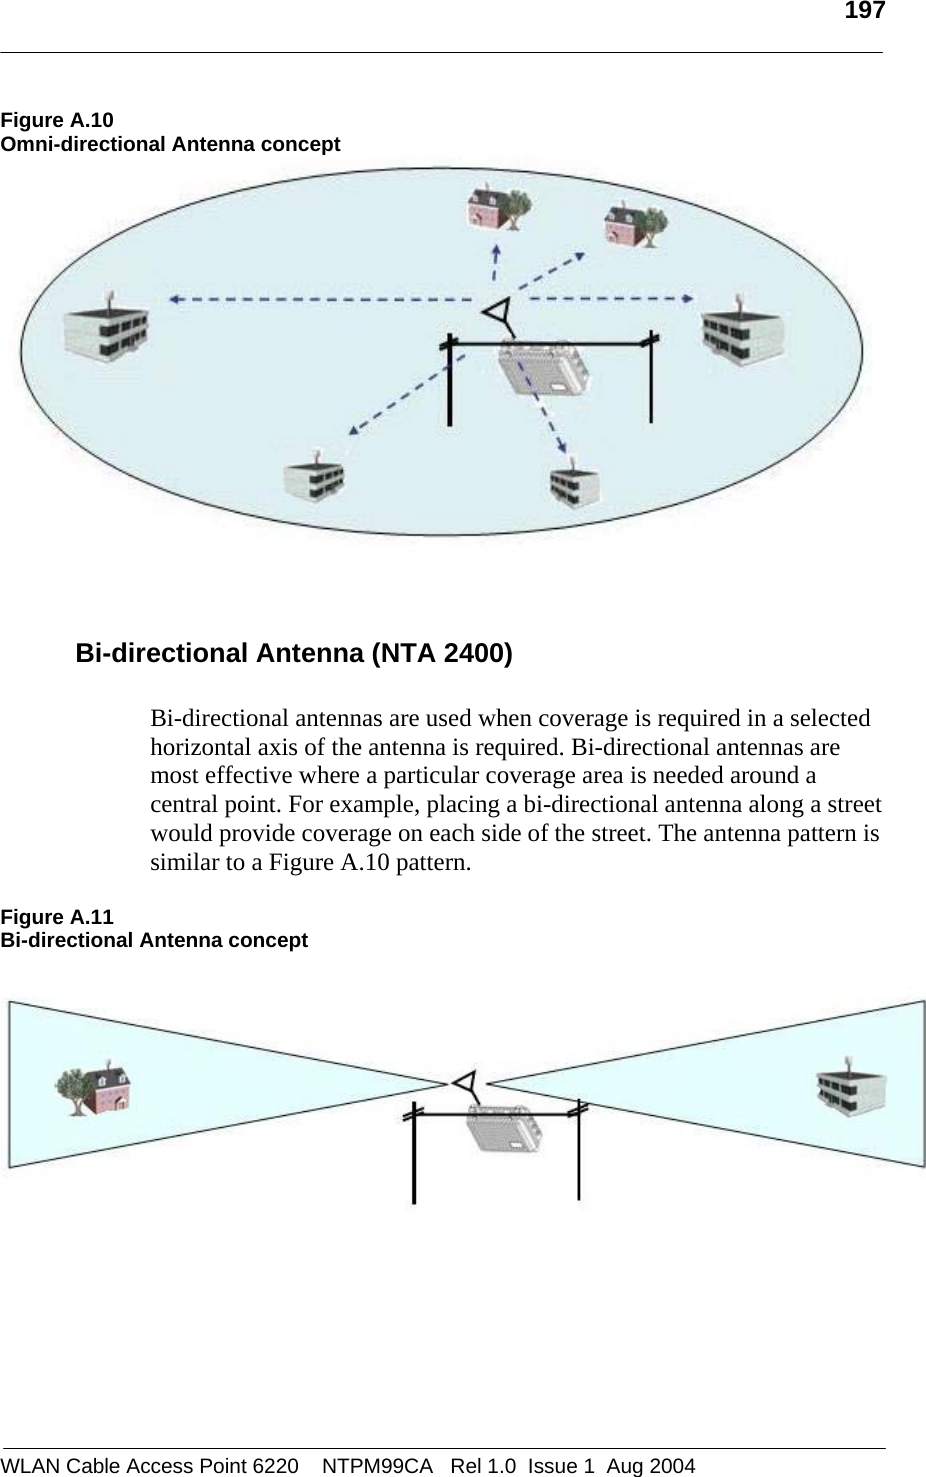   197  Figure A.10 Omni-directional Antenna concept   Bi-directional Antenna (NTA 2400)  Bi-directional antennas are used when coverage is required in a selected horizontal axis of the antenna is required. Bi-directional antennas are most effective where a particular coverage area is needed around a central point. For example, placing a bi-directional antenna along a street would provide coverage on each side of the street. The antenna pattern is similar to a Figure A.10 pattern.  Figure A.11 Bi-directional Antenna concept         WLAN Cable Access Point 6220    NTPM99CA   Rel 1.0  Issue 1  Aug 2004 